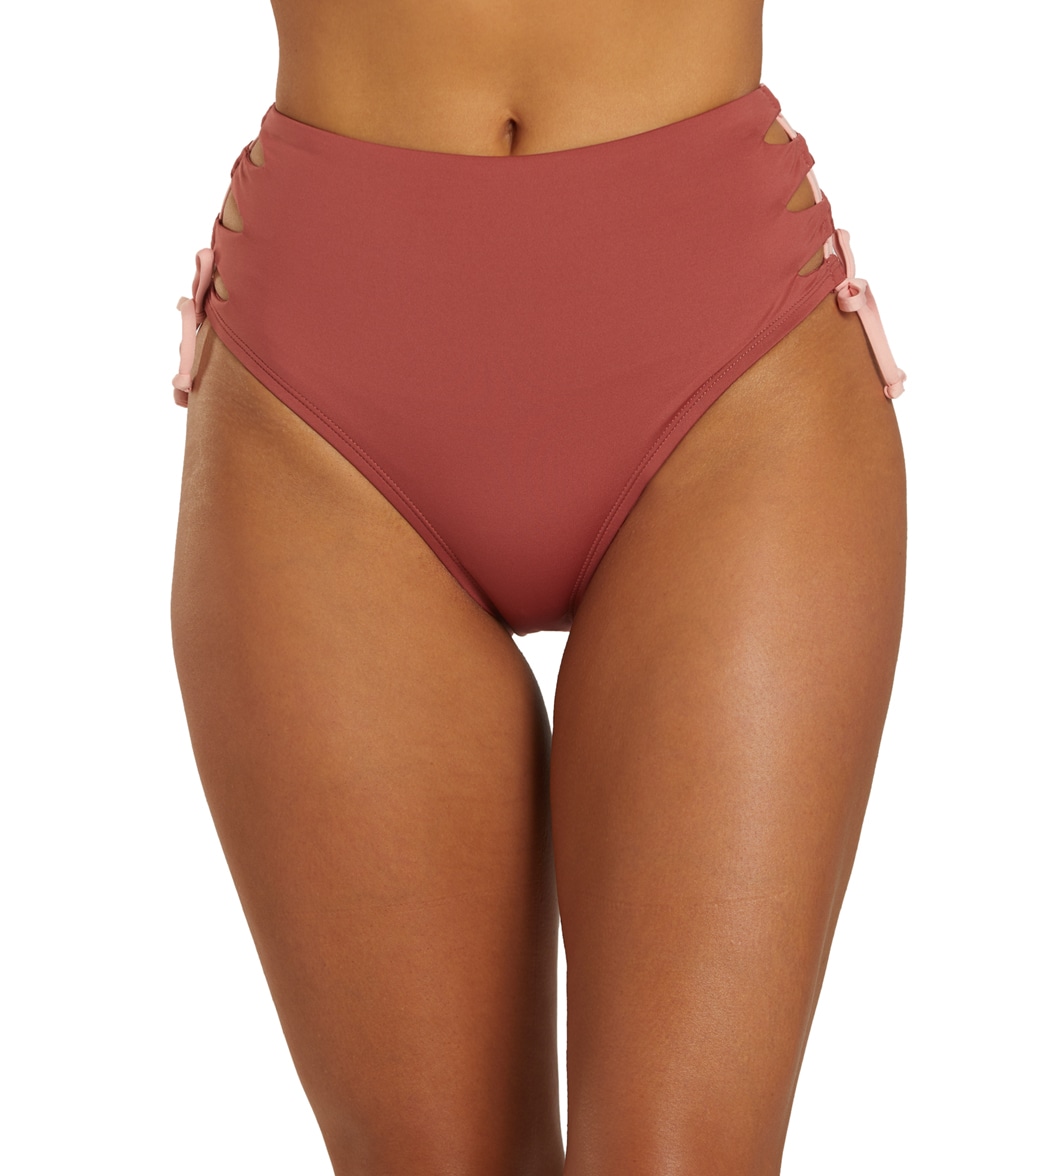 Nike Women's Solid Lace-Up High Waist Cheeky Bottom - Canyon Rust Large - Swimoutlet.com